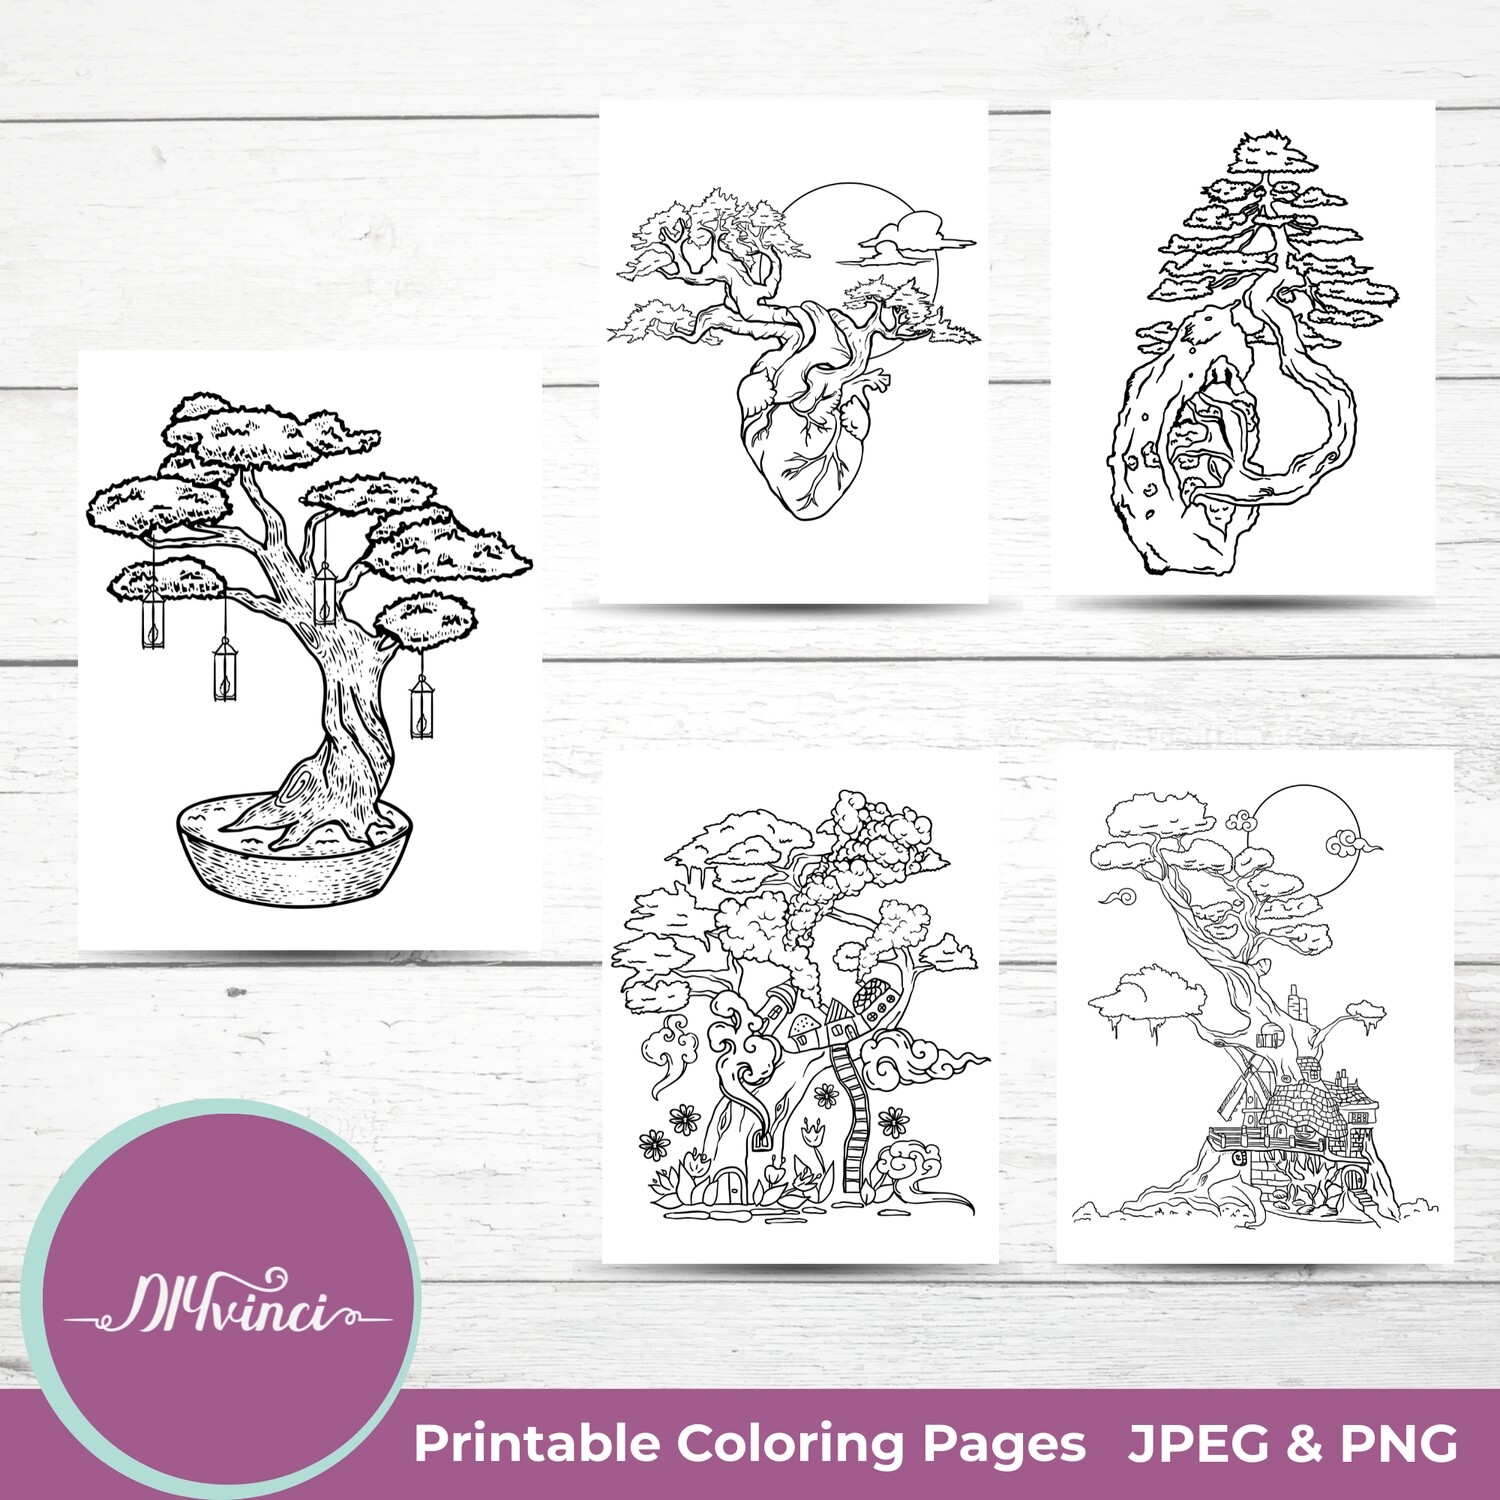 5 Printable Surreal Bonsai Coloring Pages - JPEG, PNG - Personal & Commercial Use